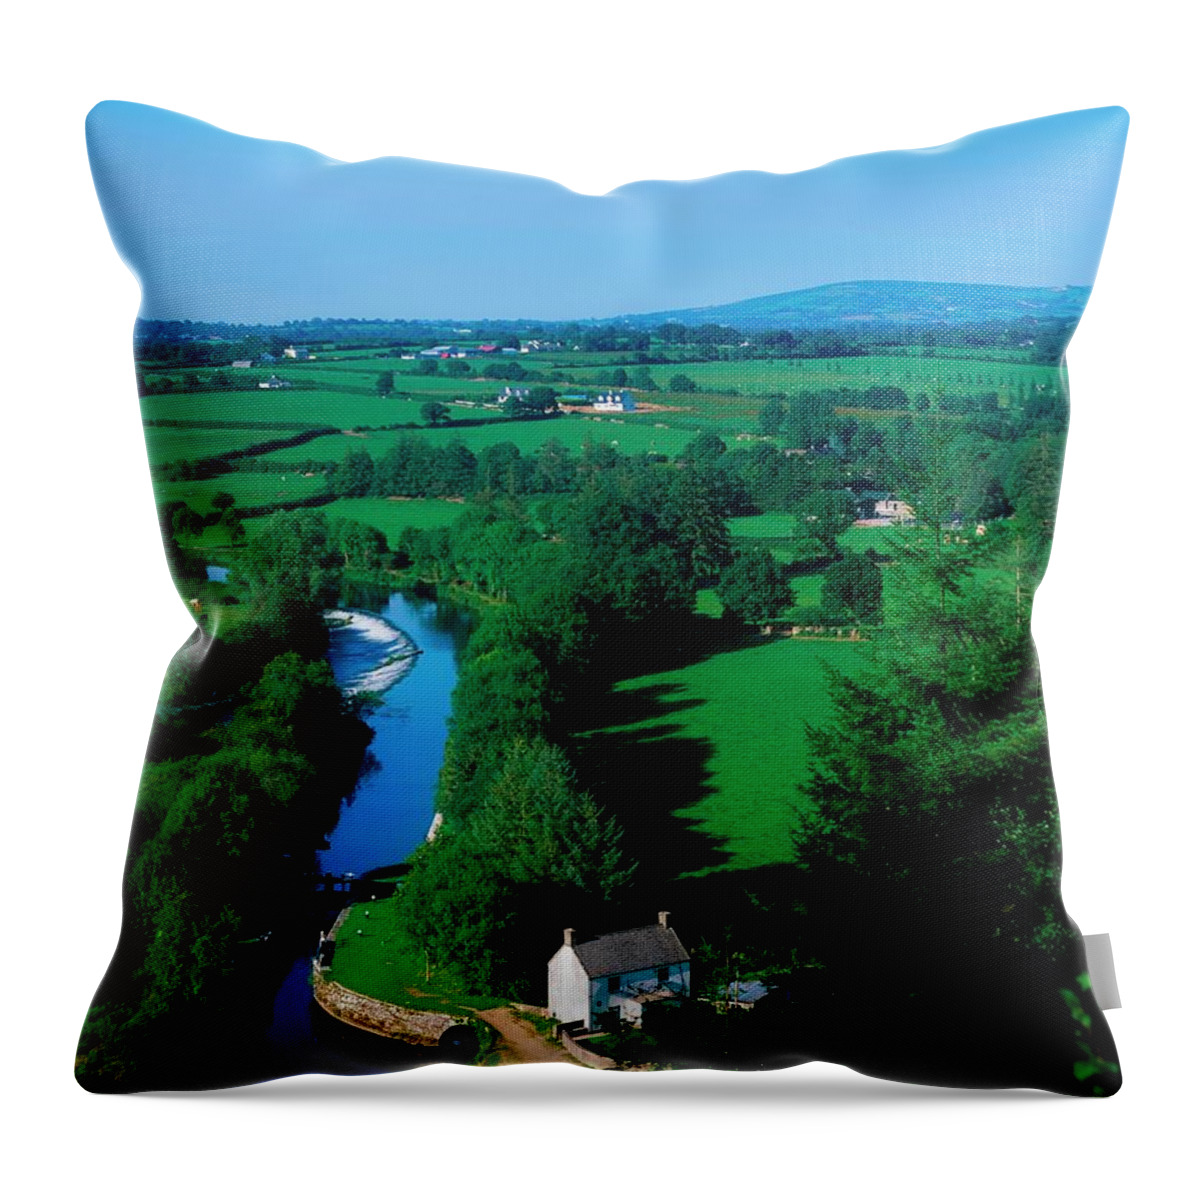 Scenics Throw Pillow featuring the photograph River Barrow Near Graiguenamanagh, Co by Design Pics/the Irish Image Collection